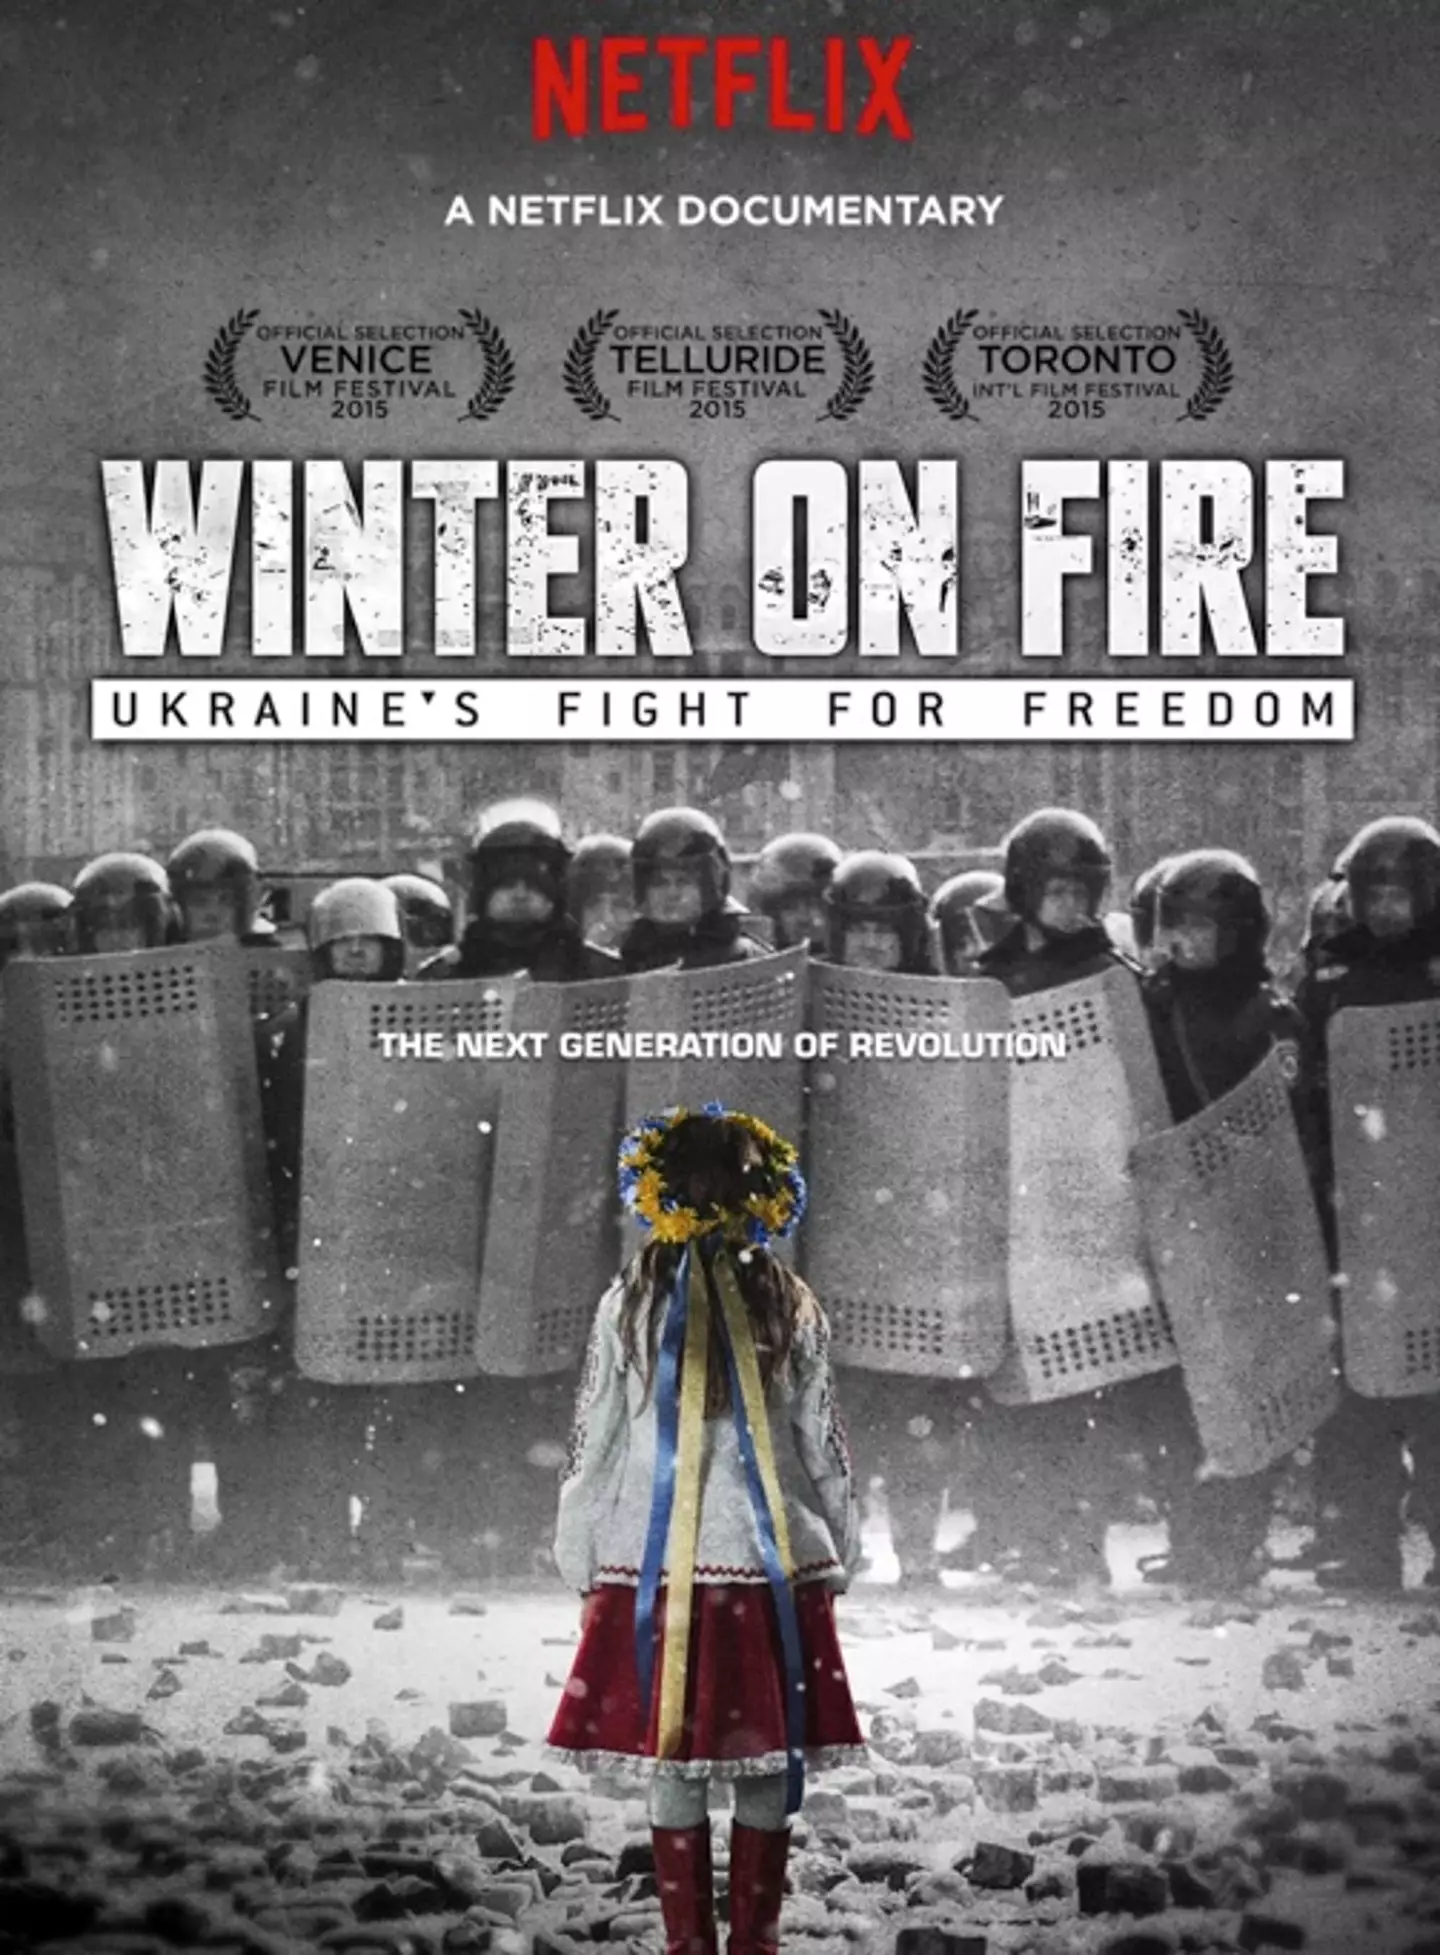 People are recommending Winter on Fire to better understand Ukraine's history.